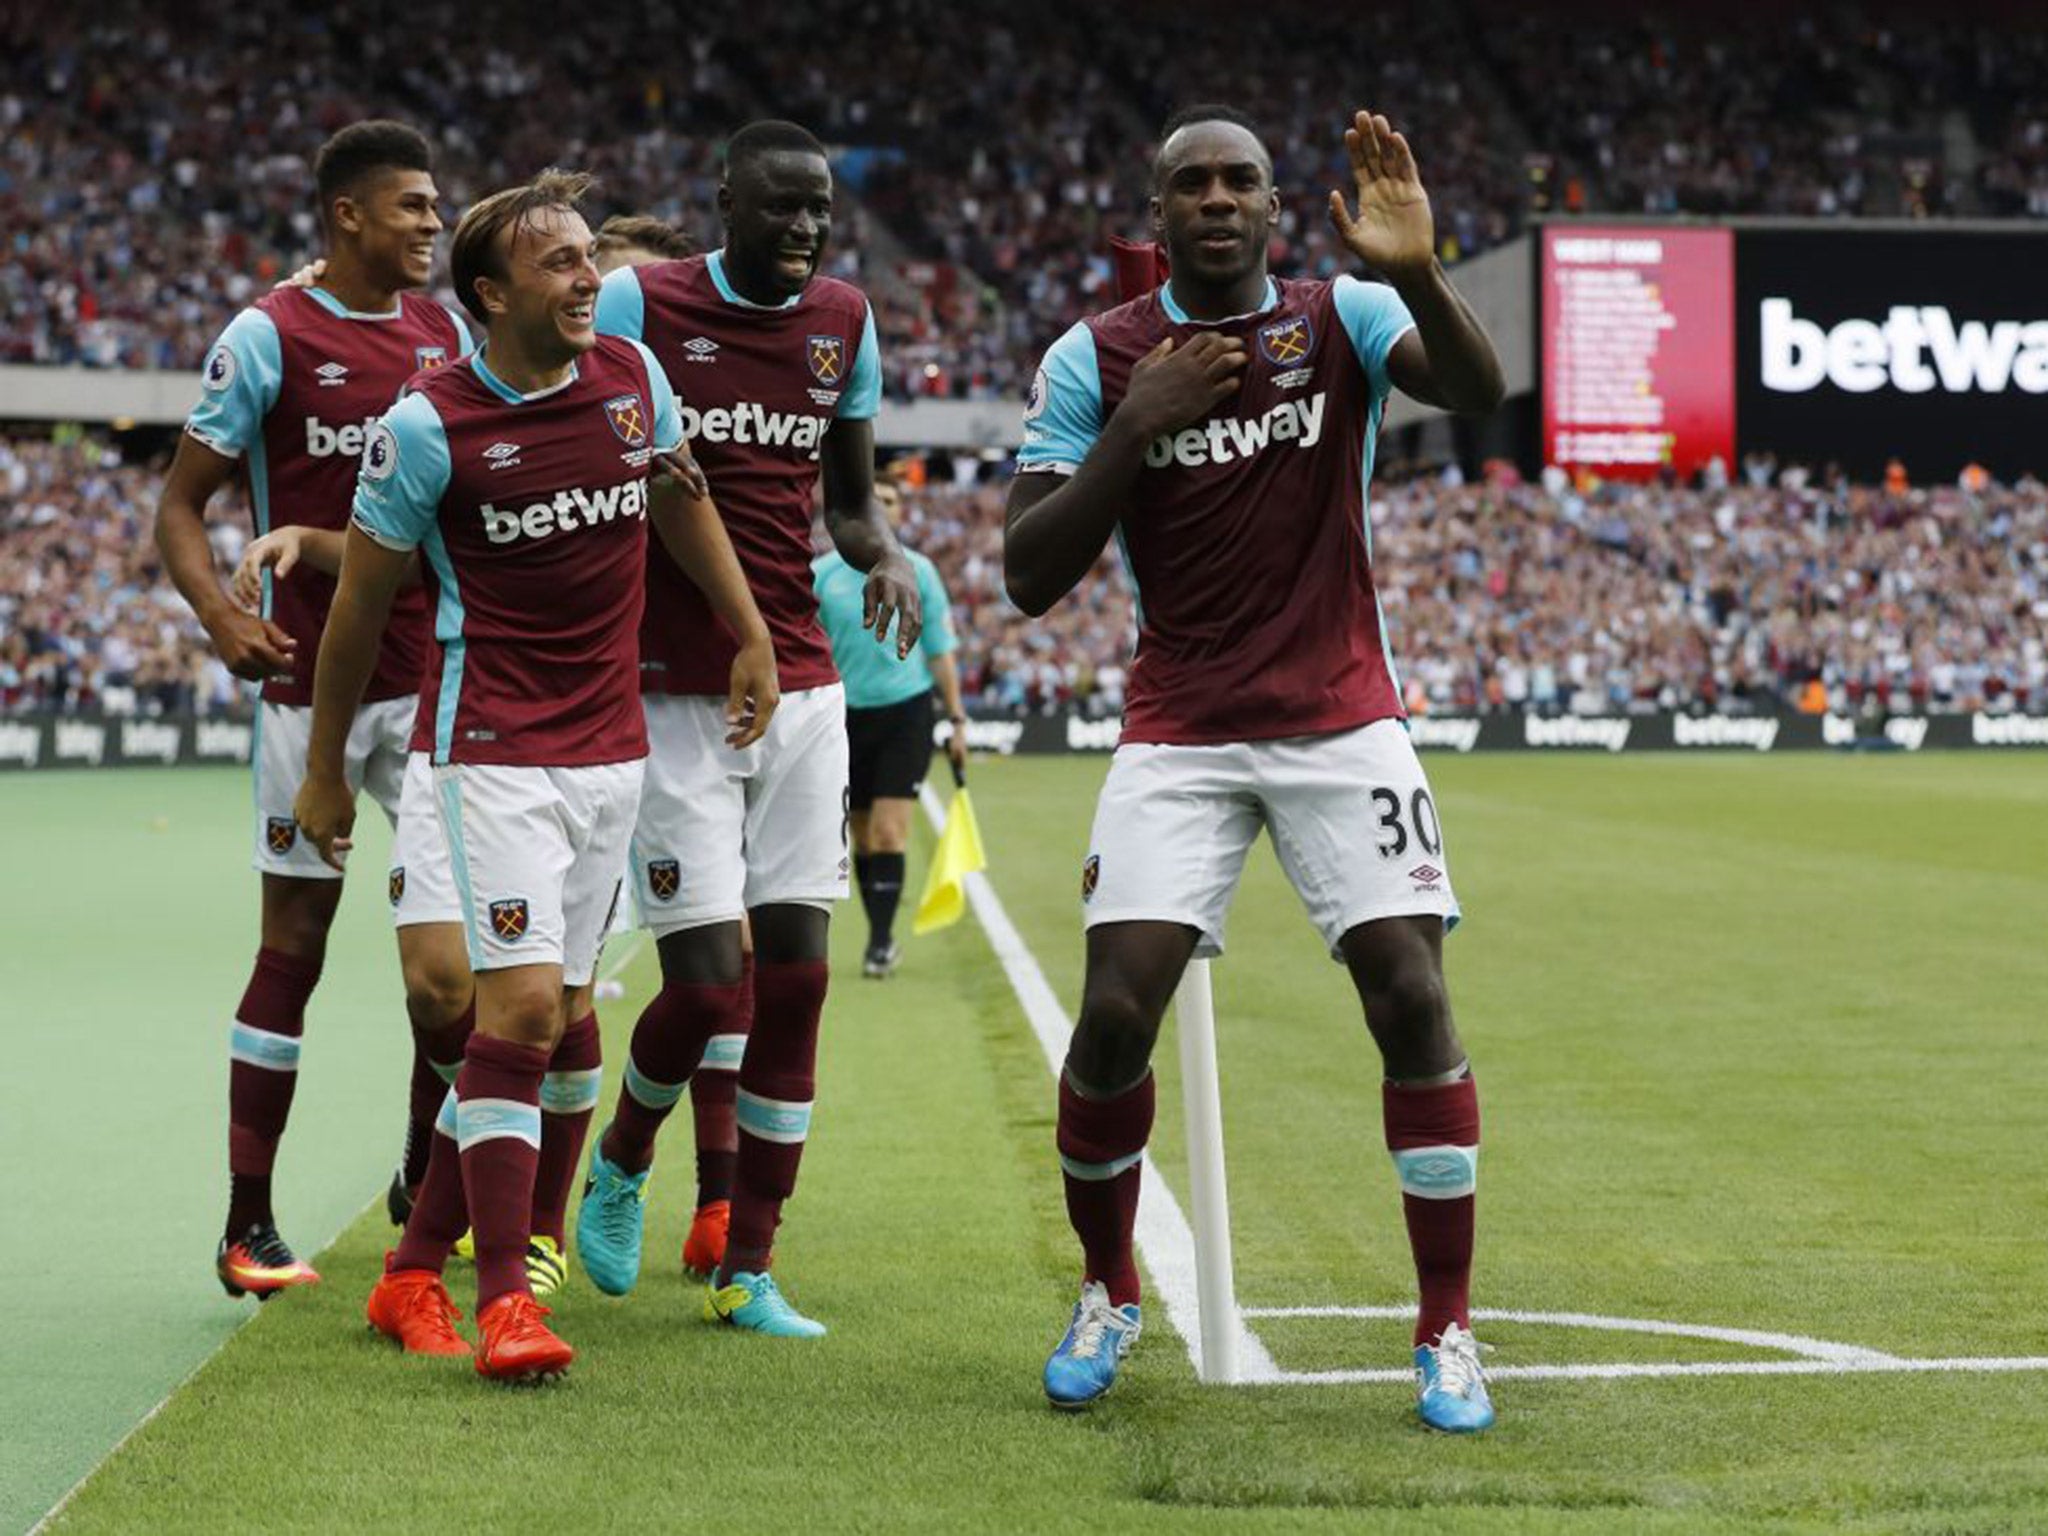 Michail Antonio celebrates after scoring late on in West Ham's 1-0 win over Bournemouth